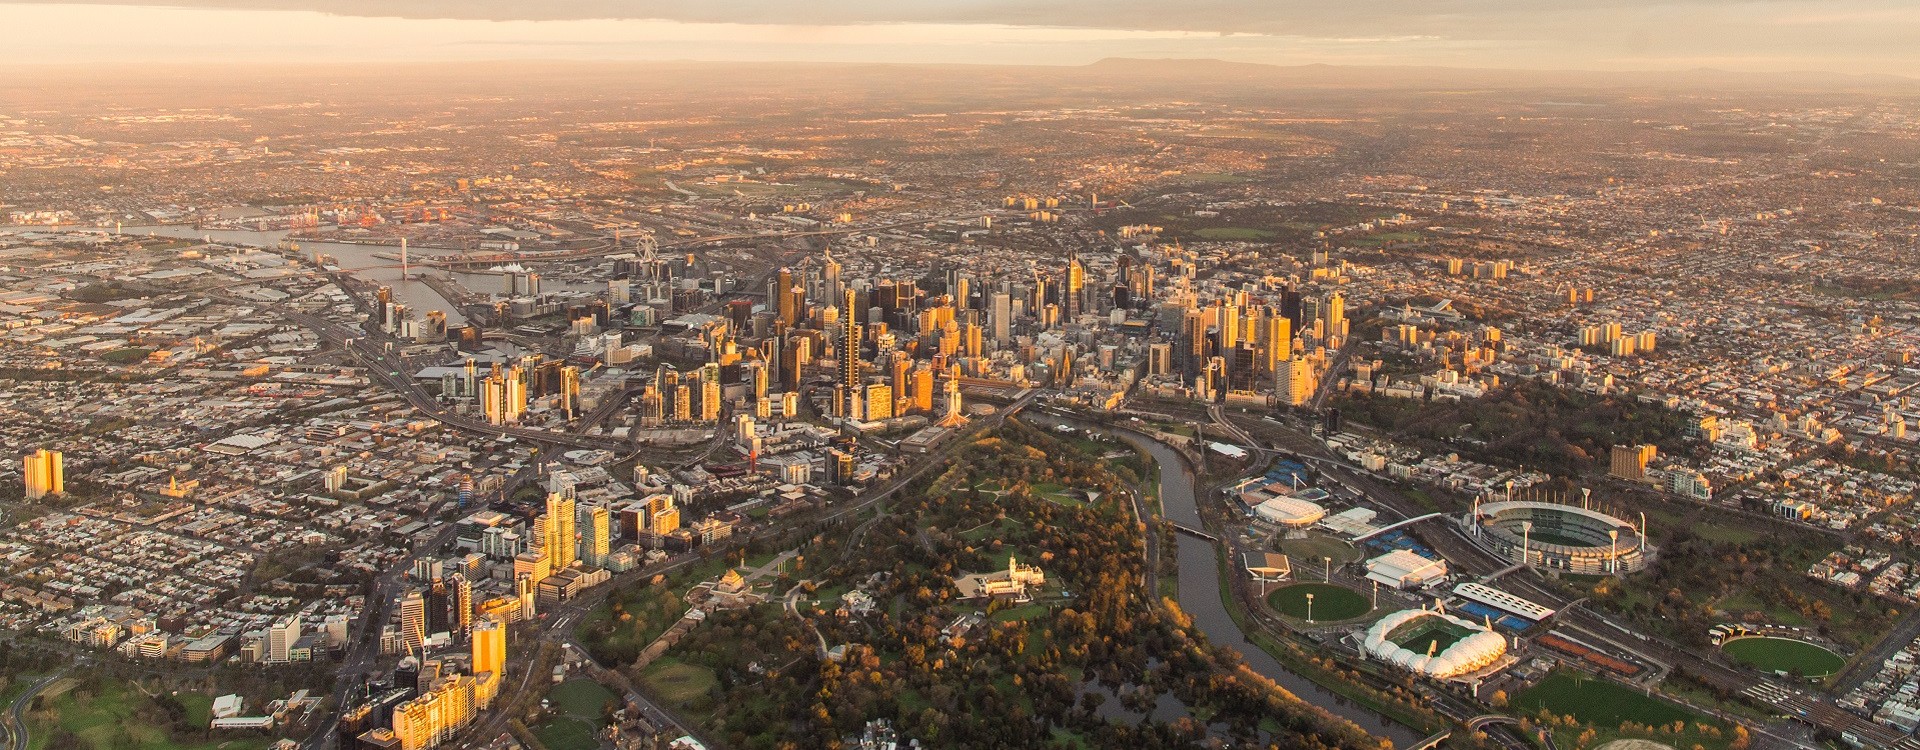 Melbourne is rated as one of the world’s most liveable cities